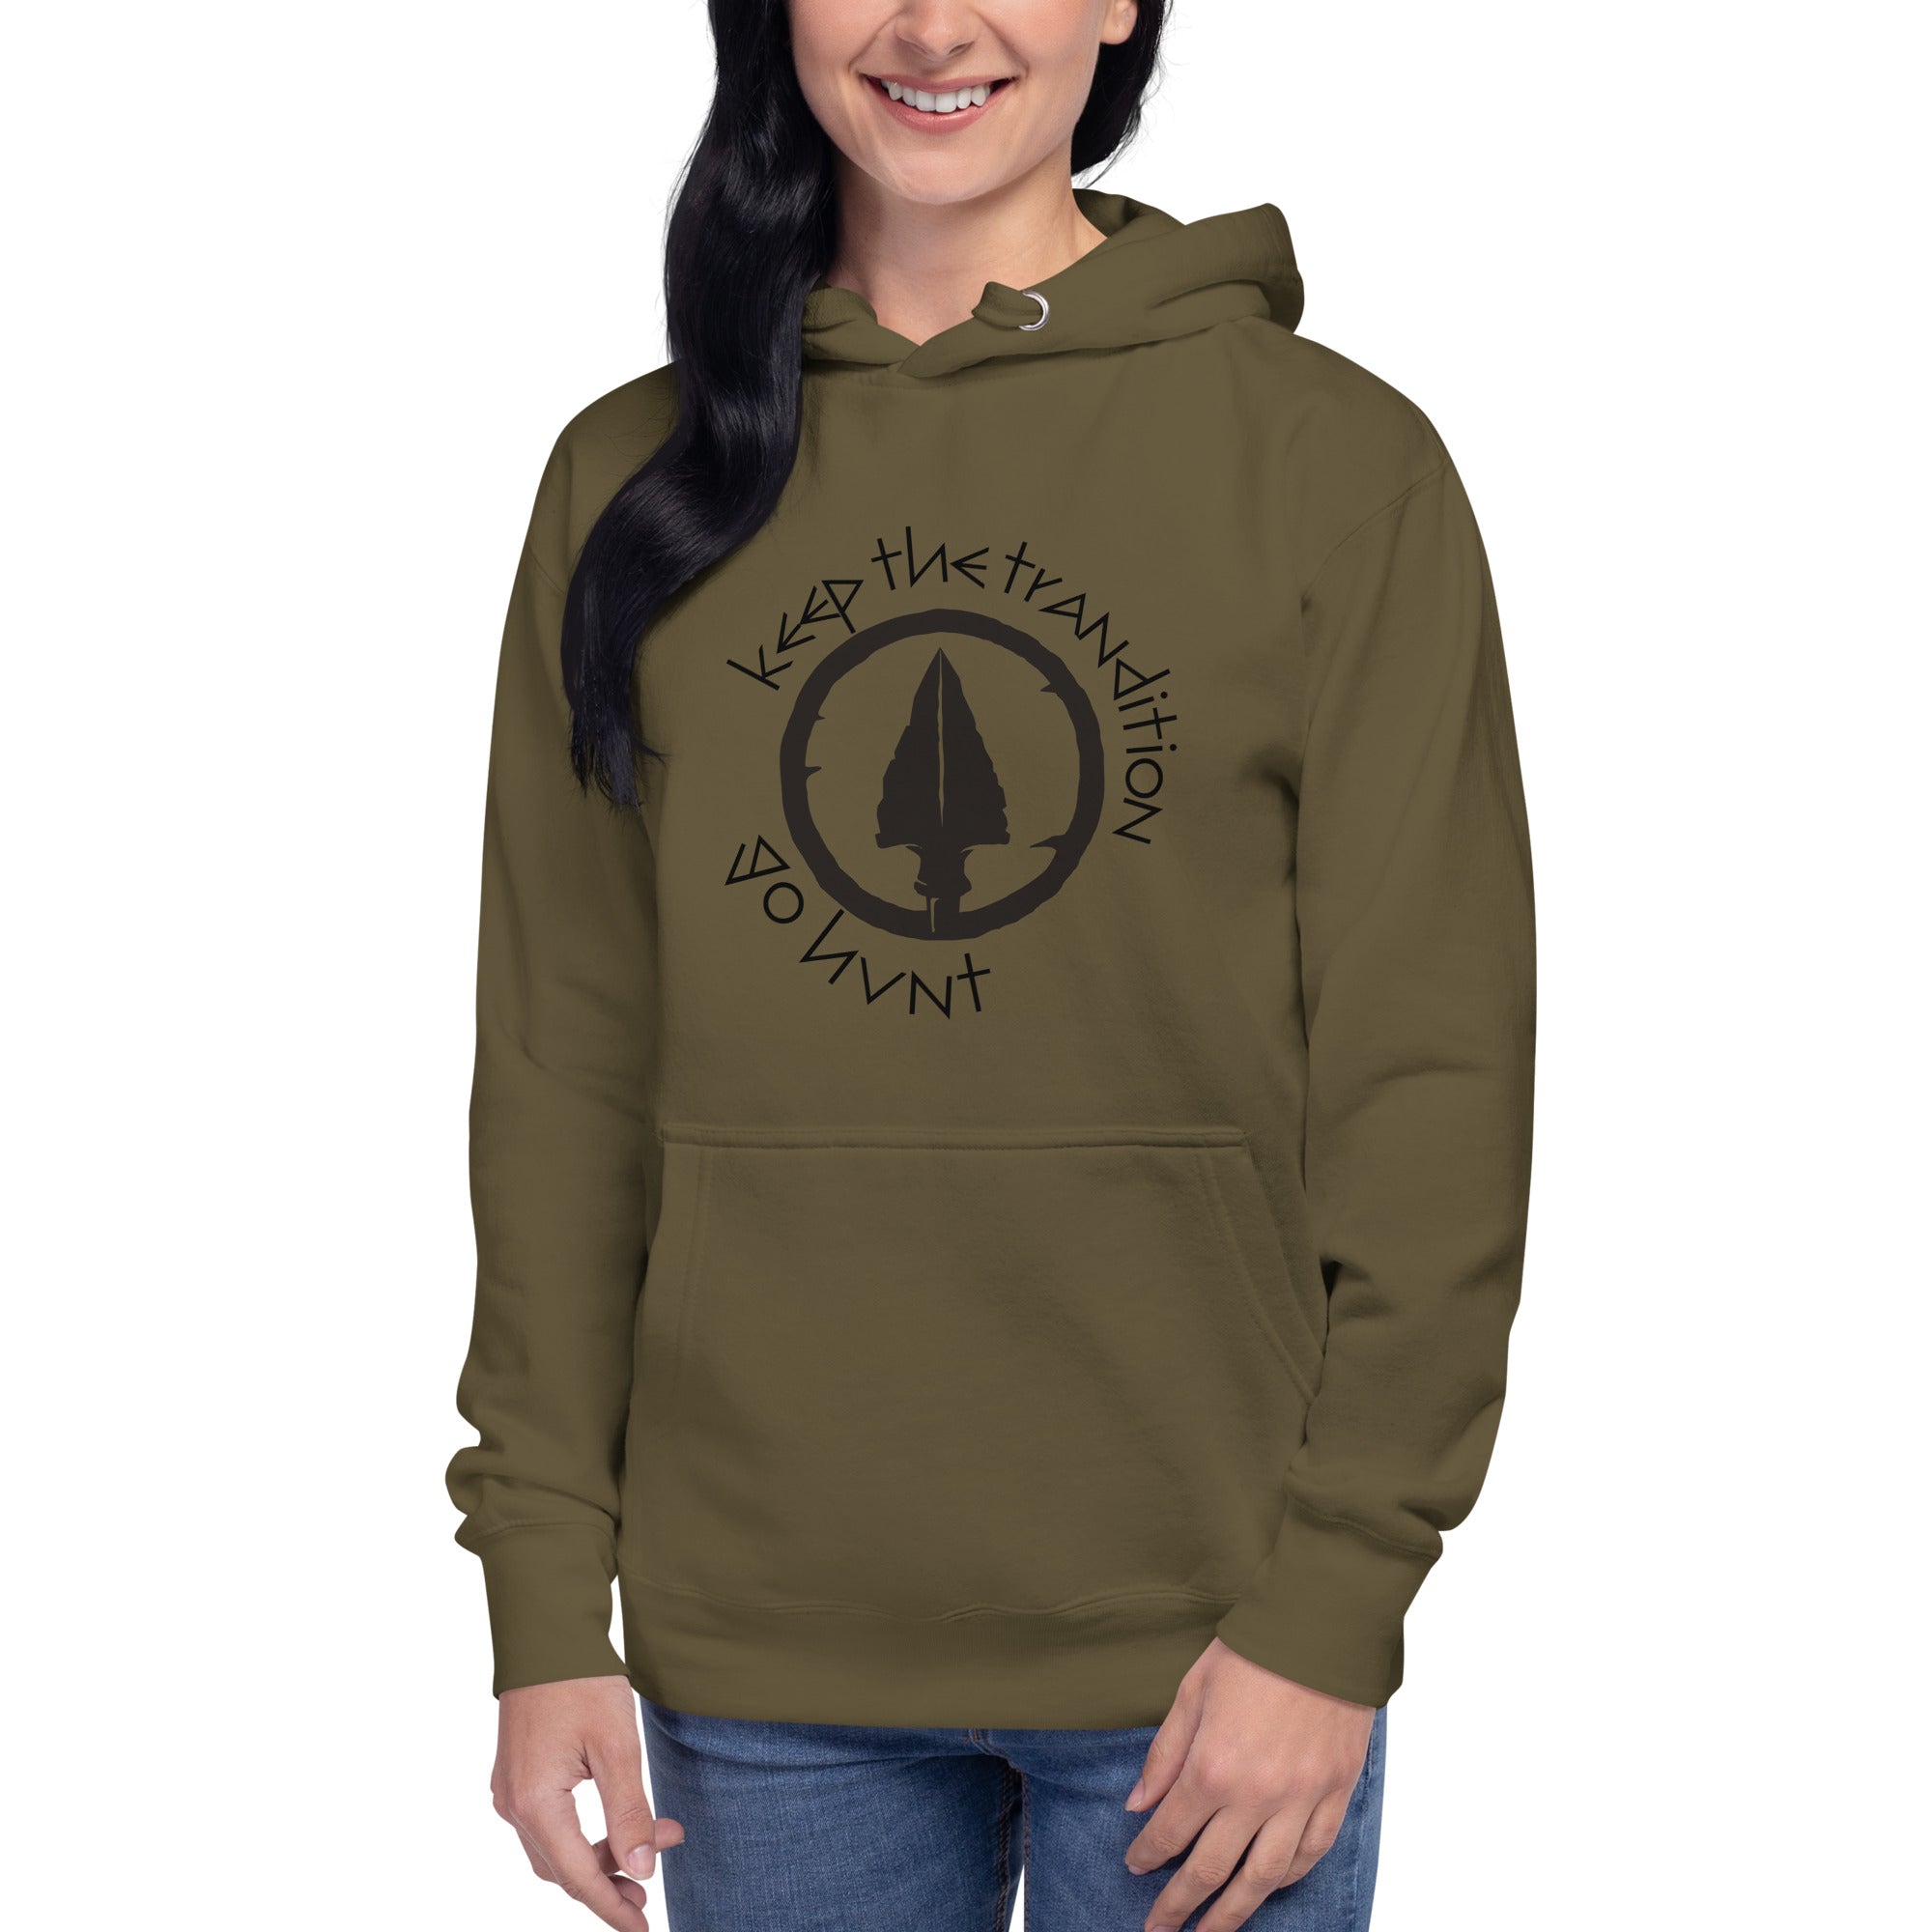 Keep The Tradition Women's Heavy Hoodie - Go Hunt